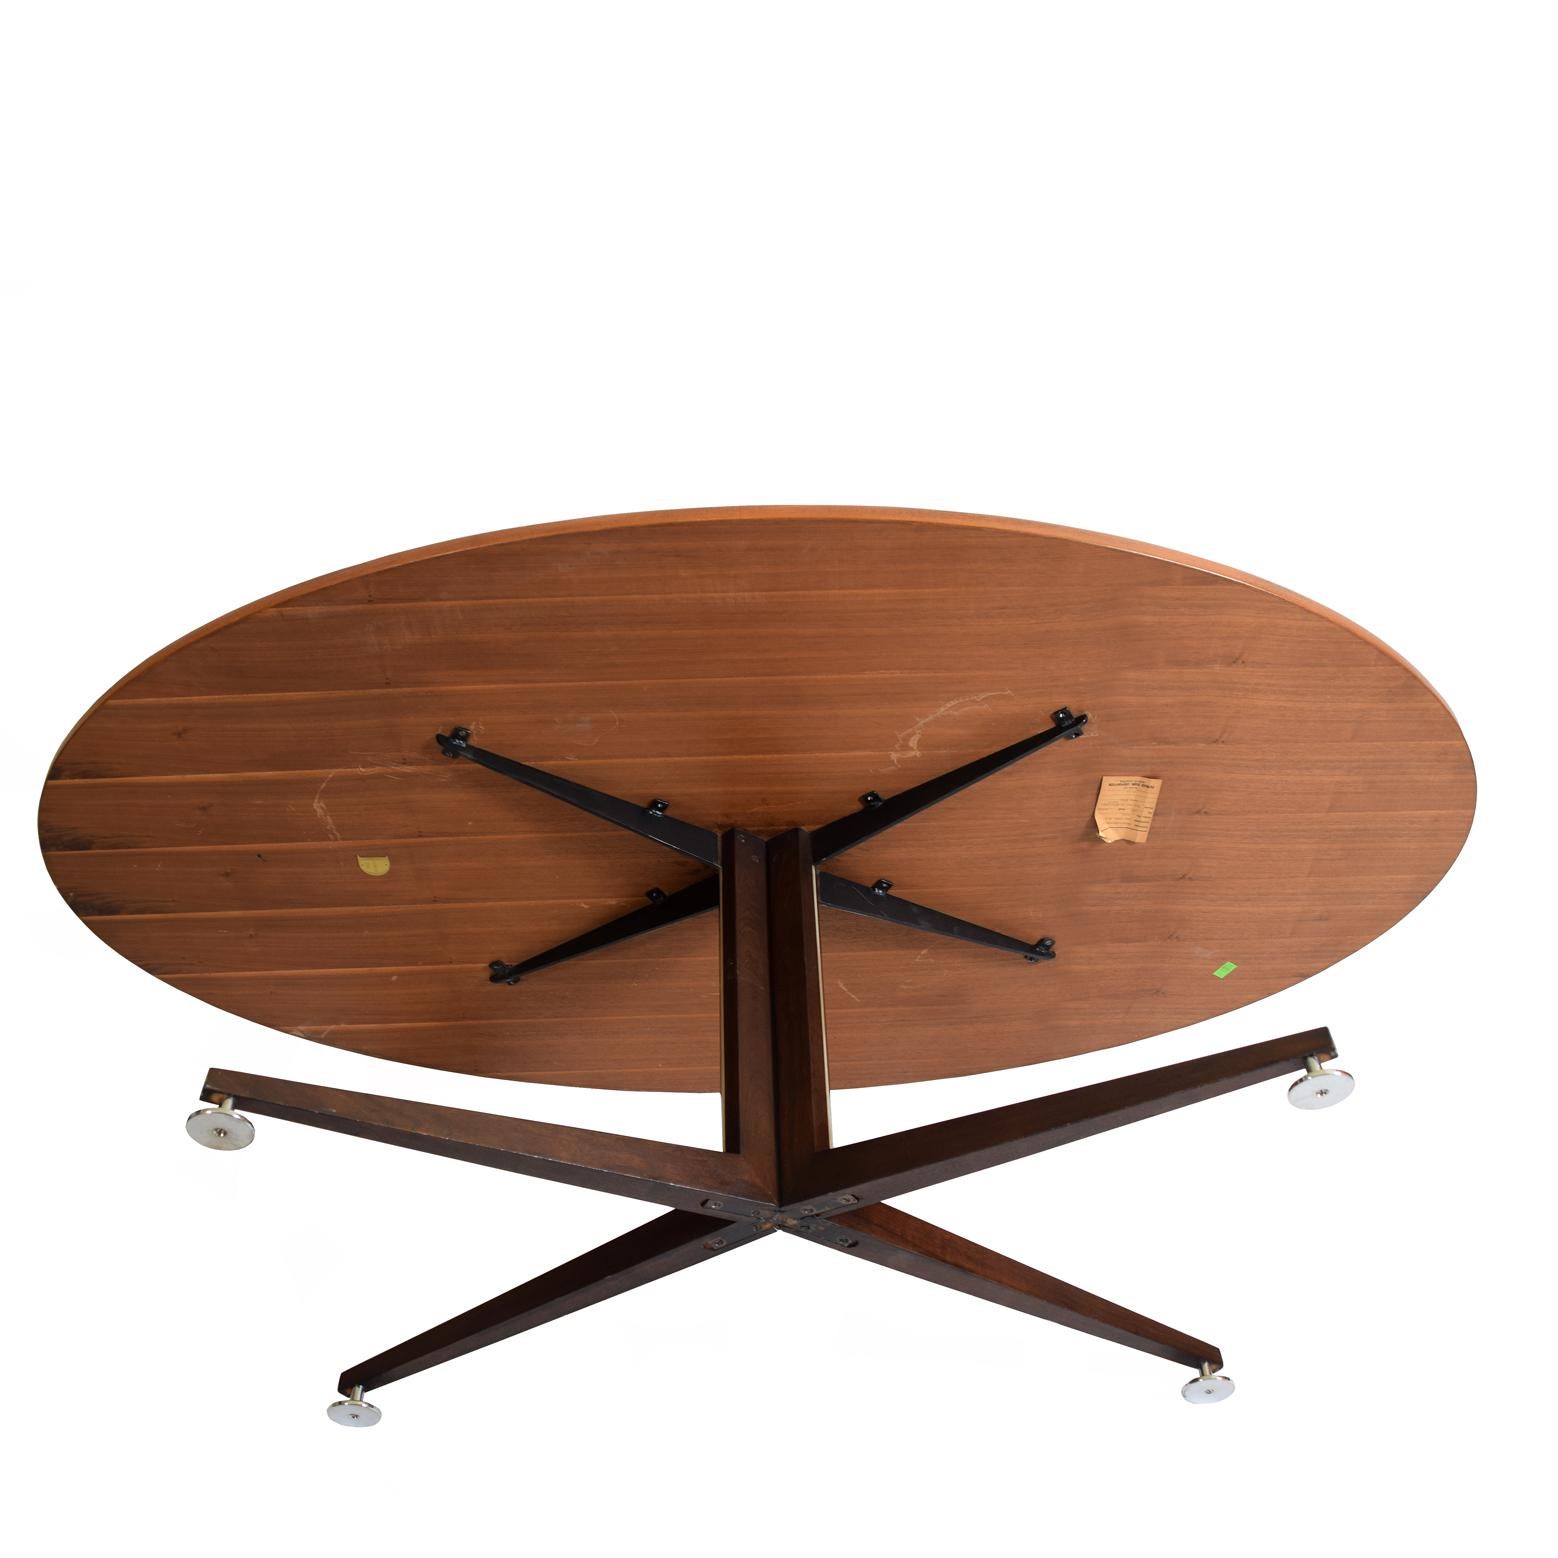 Edward Wormley Teak Dining Table for Dunbar #936 In Good Condition For Sale In Hudson, NY